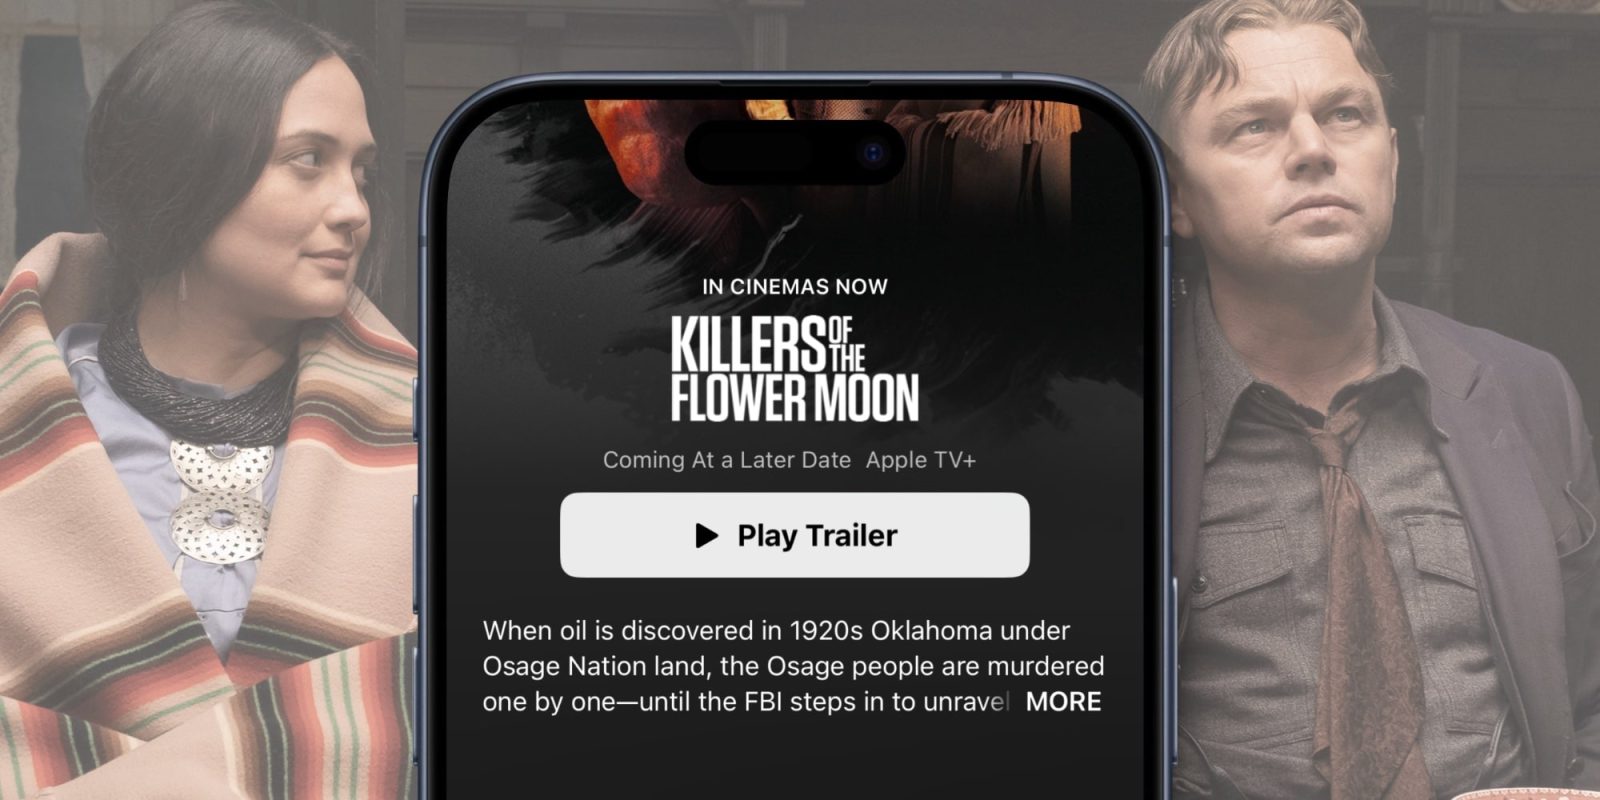 Killers of the Flower Moon In Theaters